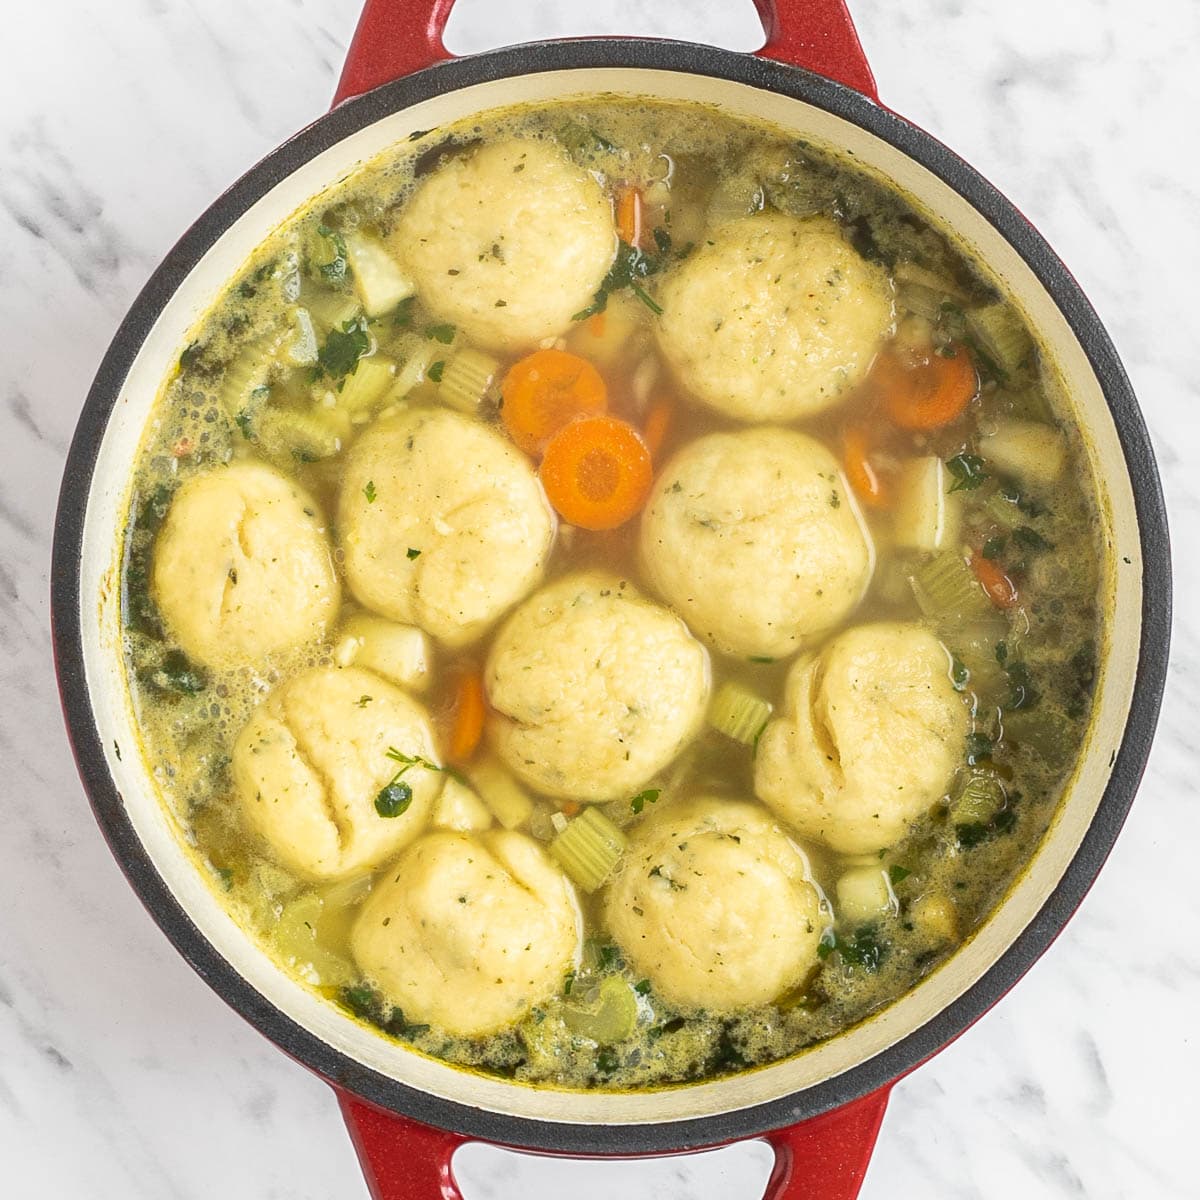 Dutch oven with dumplings, chopped veggies and green herbs in a light vegetable broth.